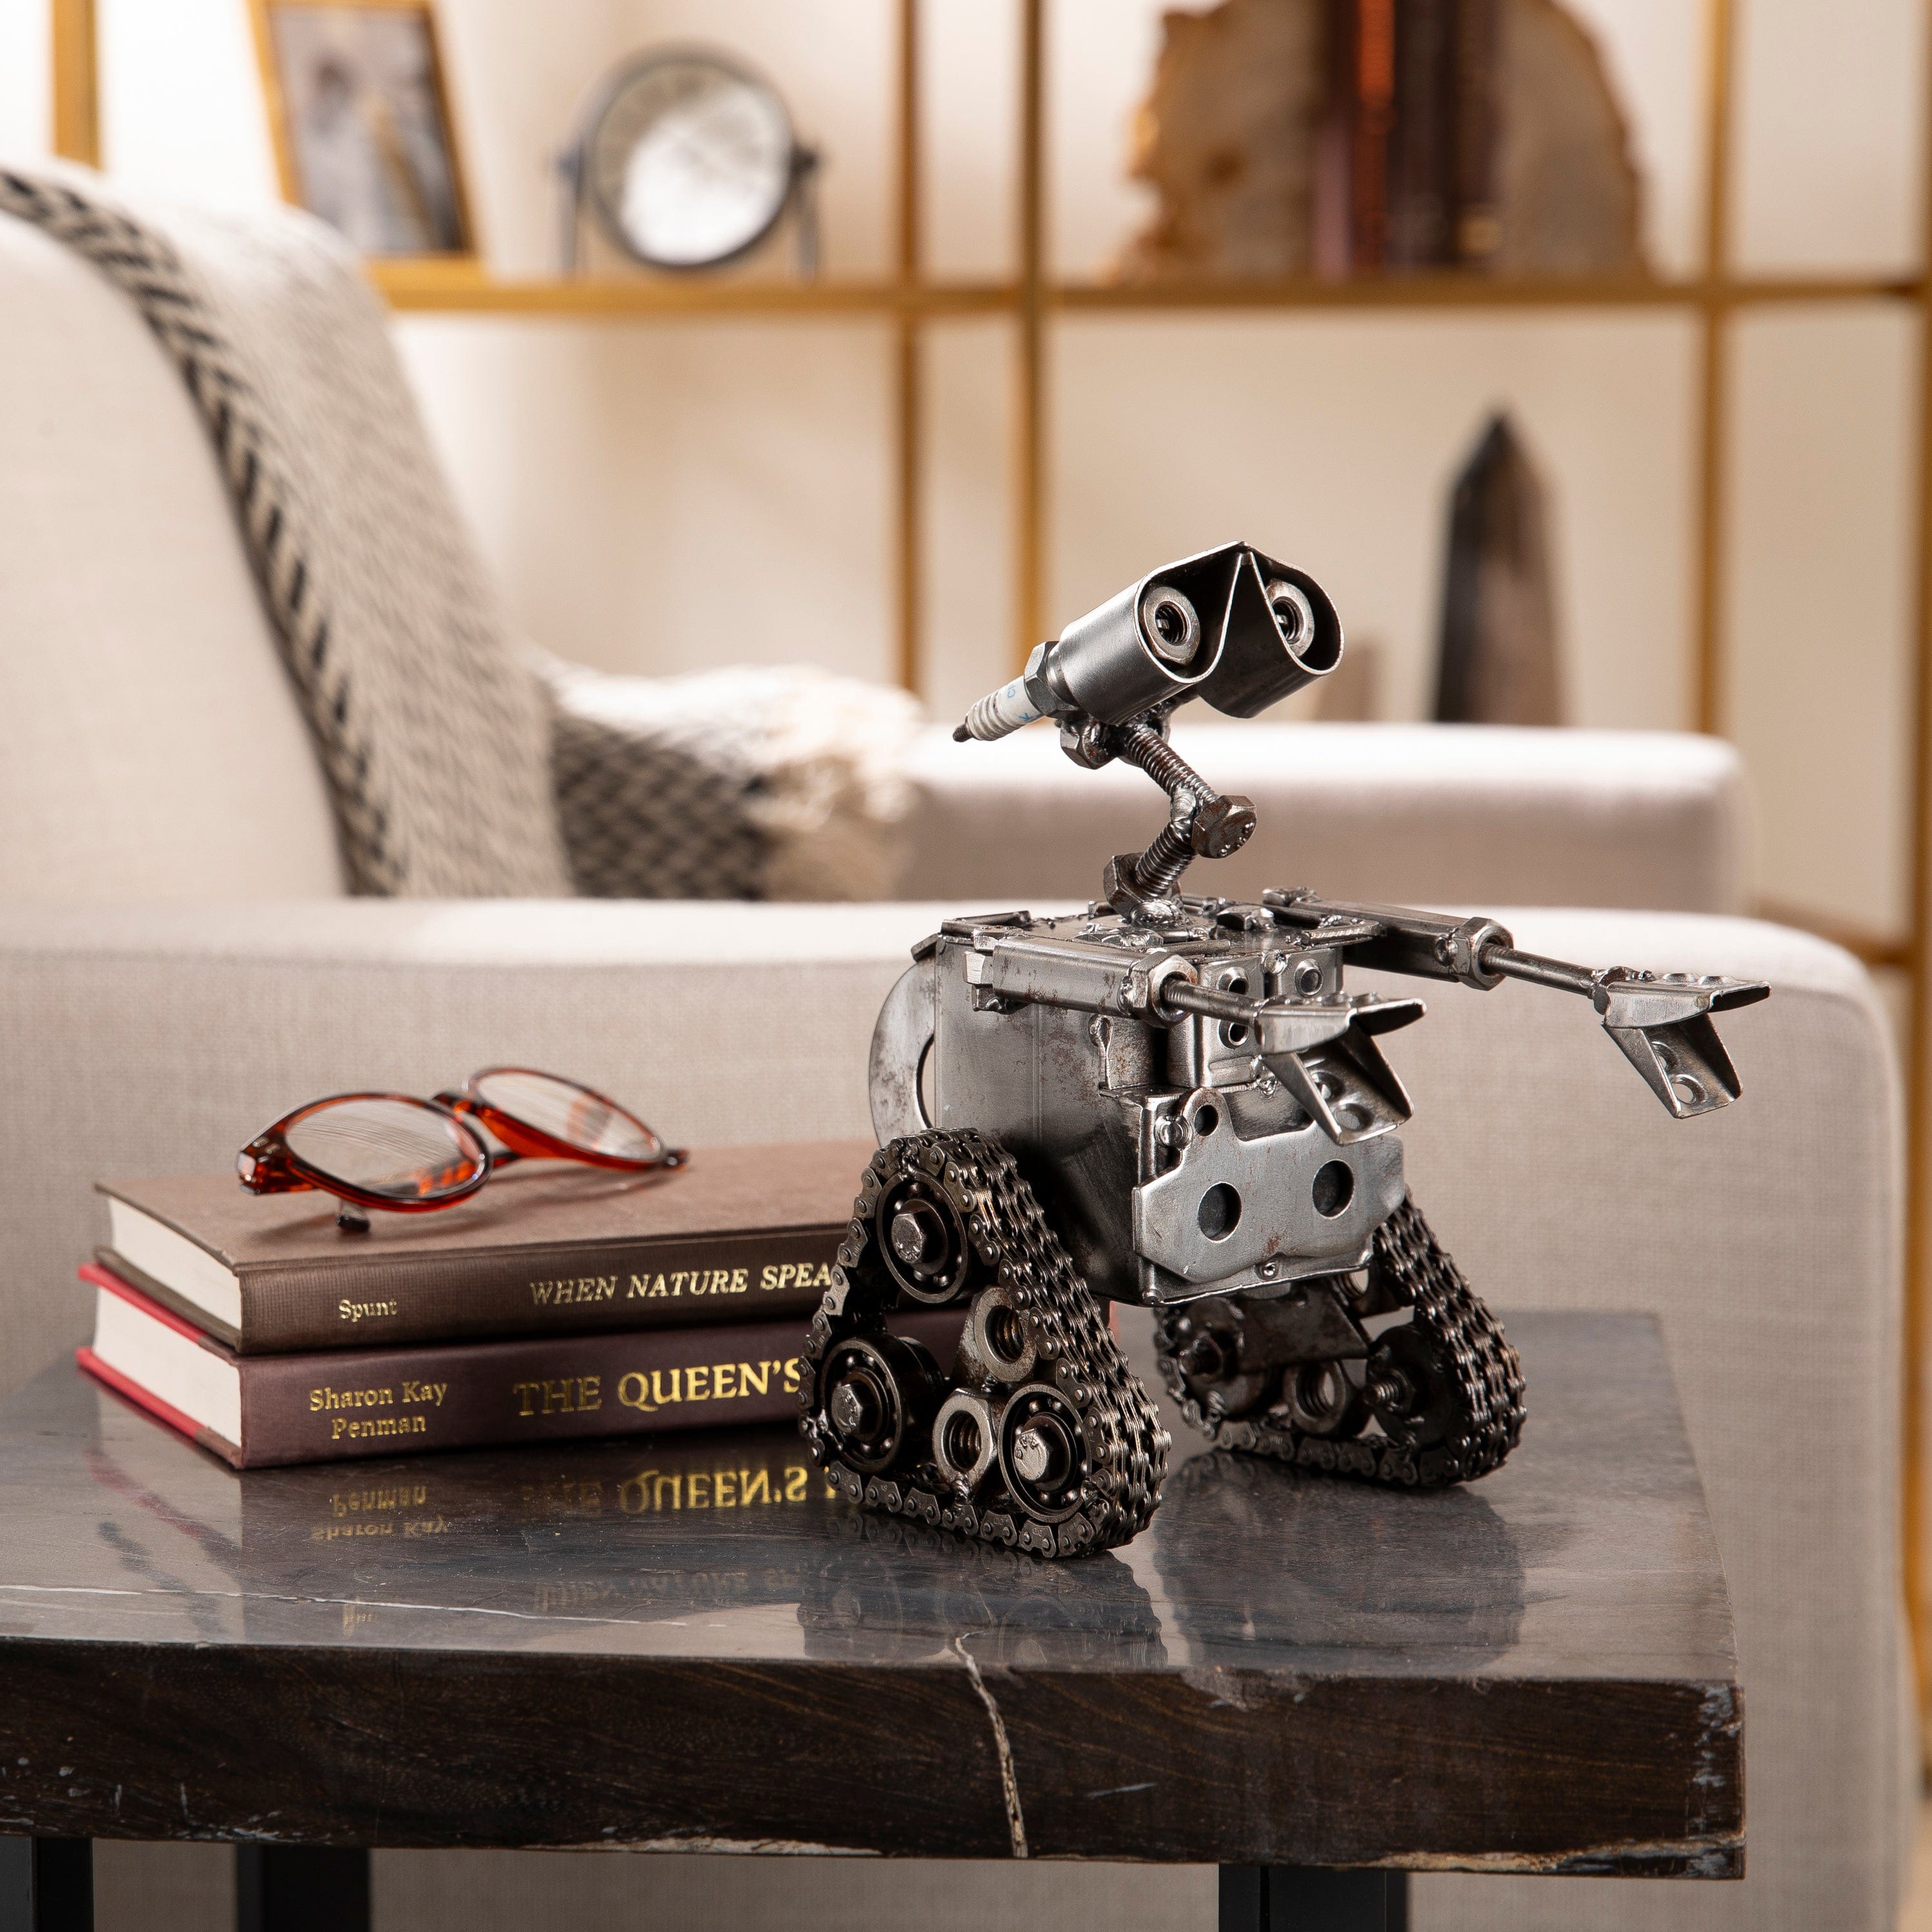 Kalifano Recycled Metal Art Wall-E Inspired Recycled Metal Sculpture RMS-500WE-N